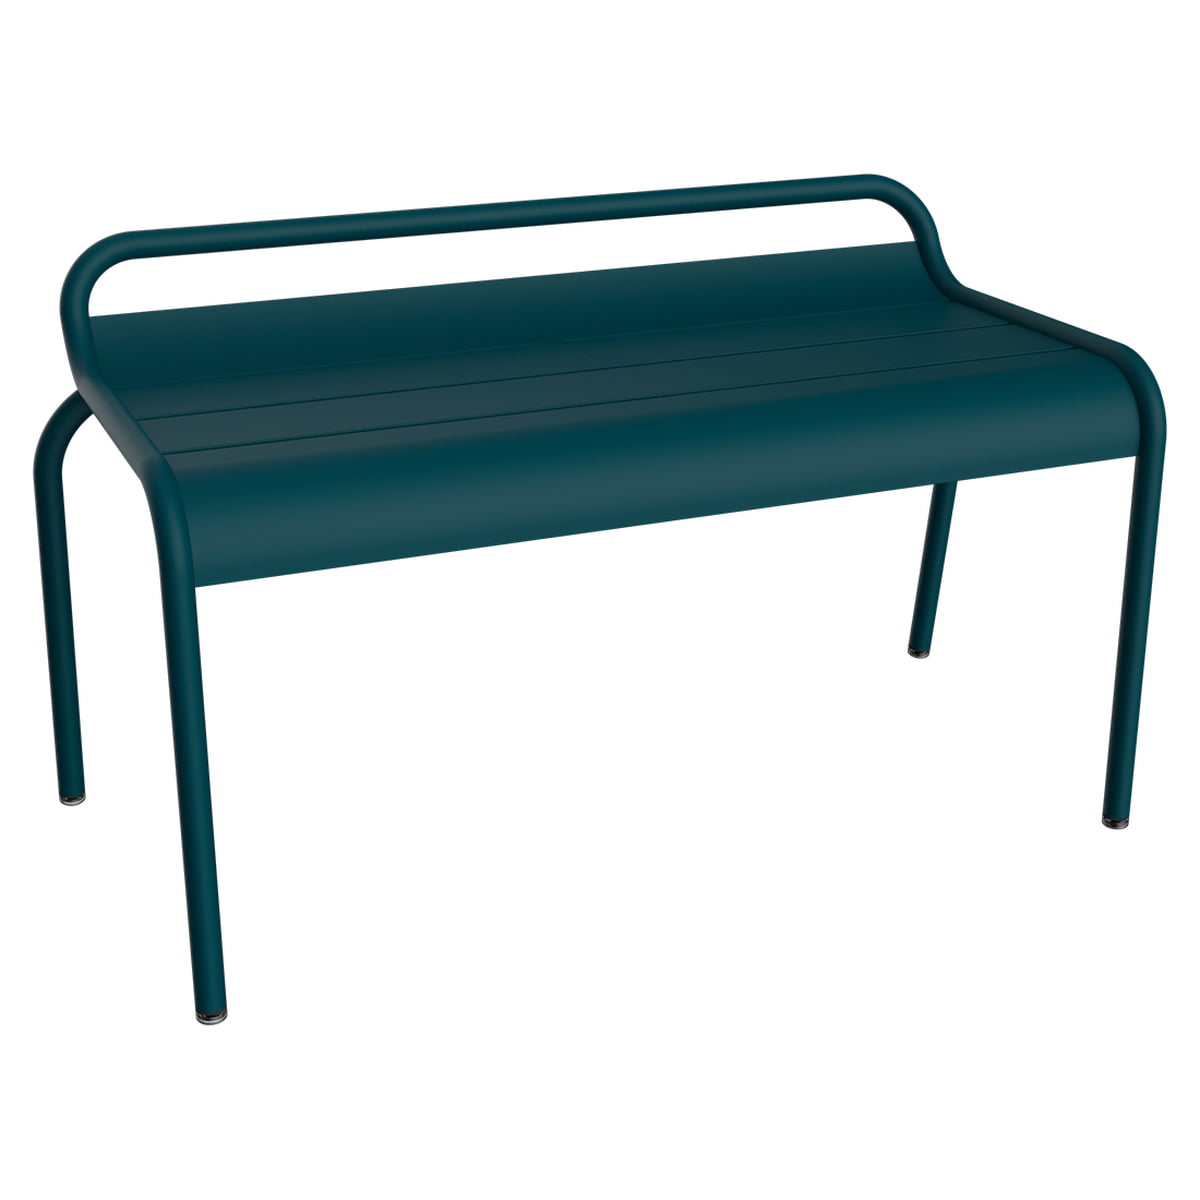 Fermob - Luxembourg Garden Connox | backrest bench without